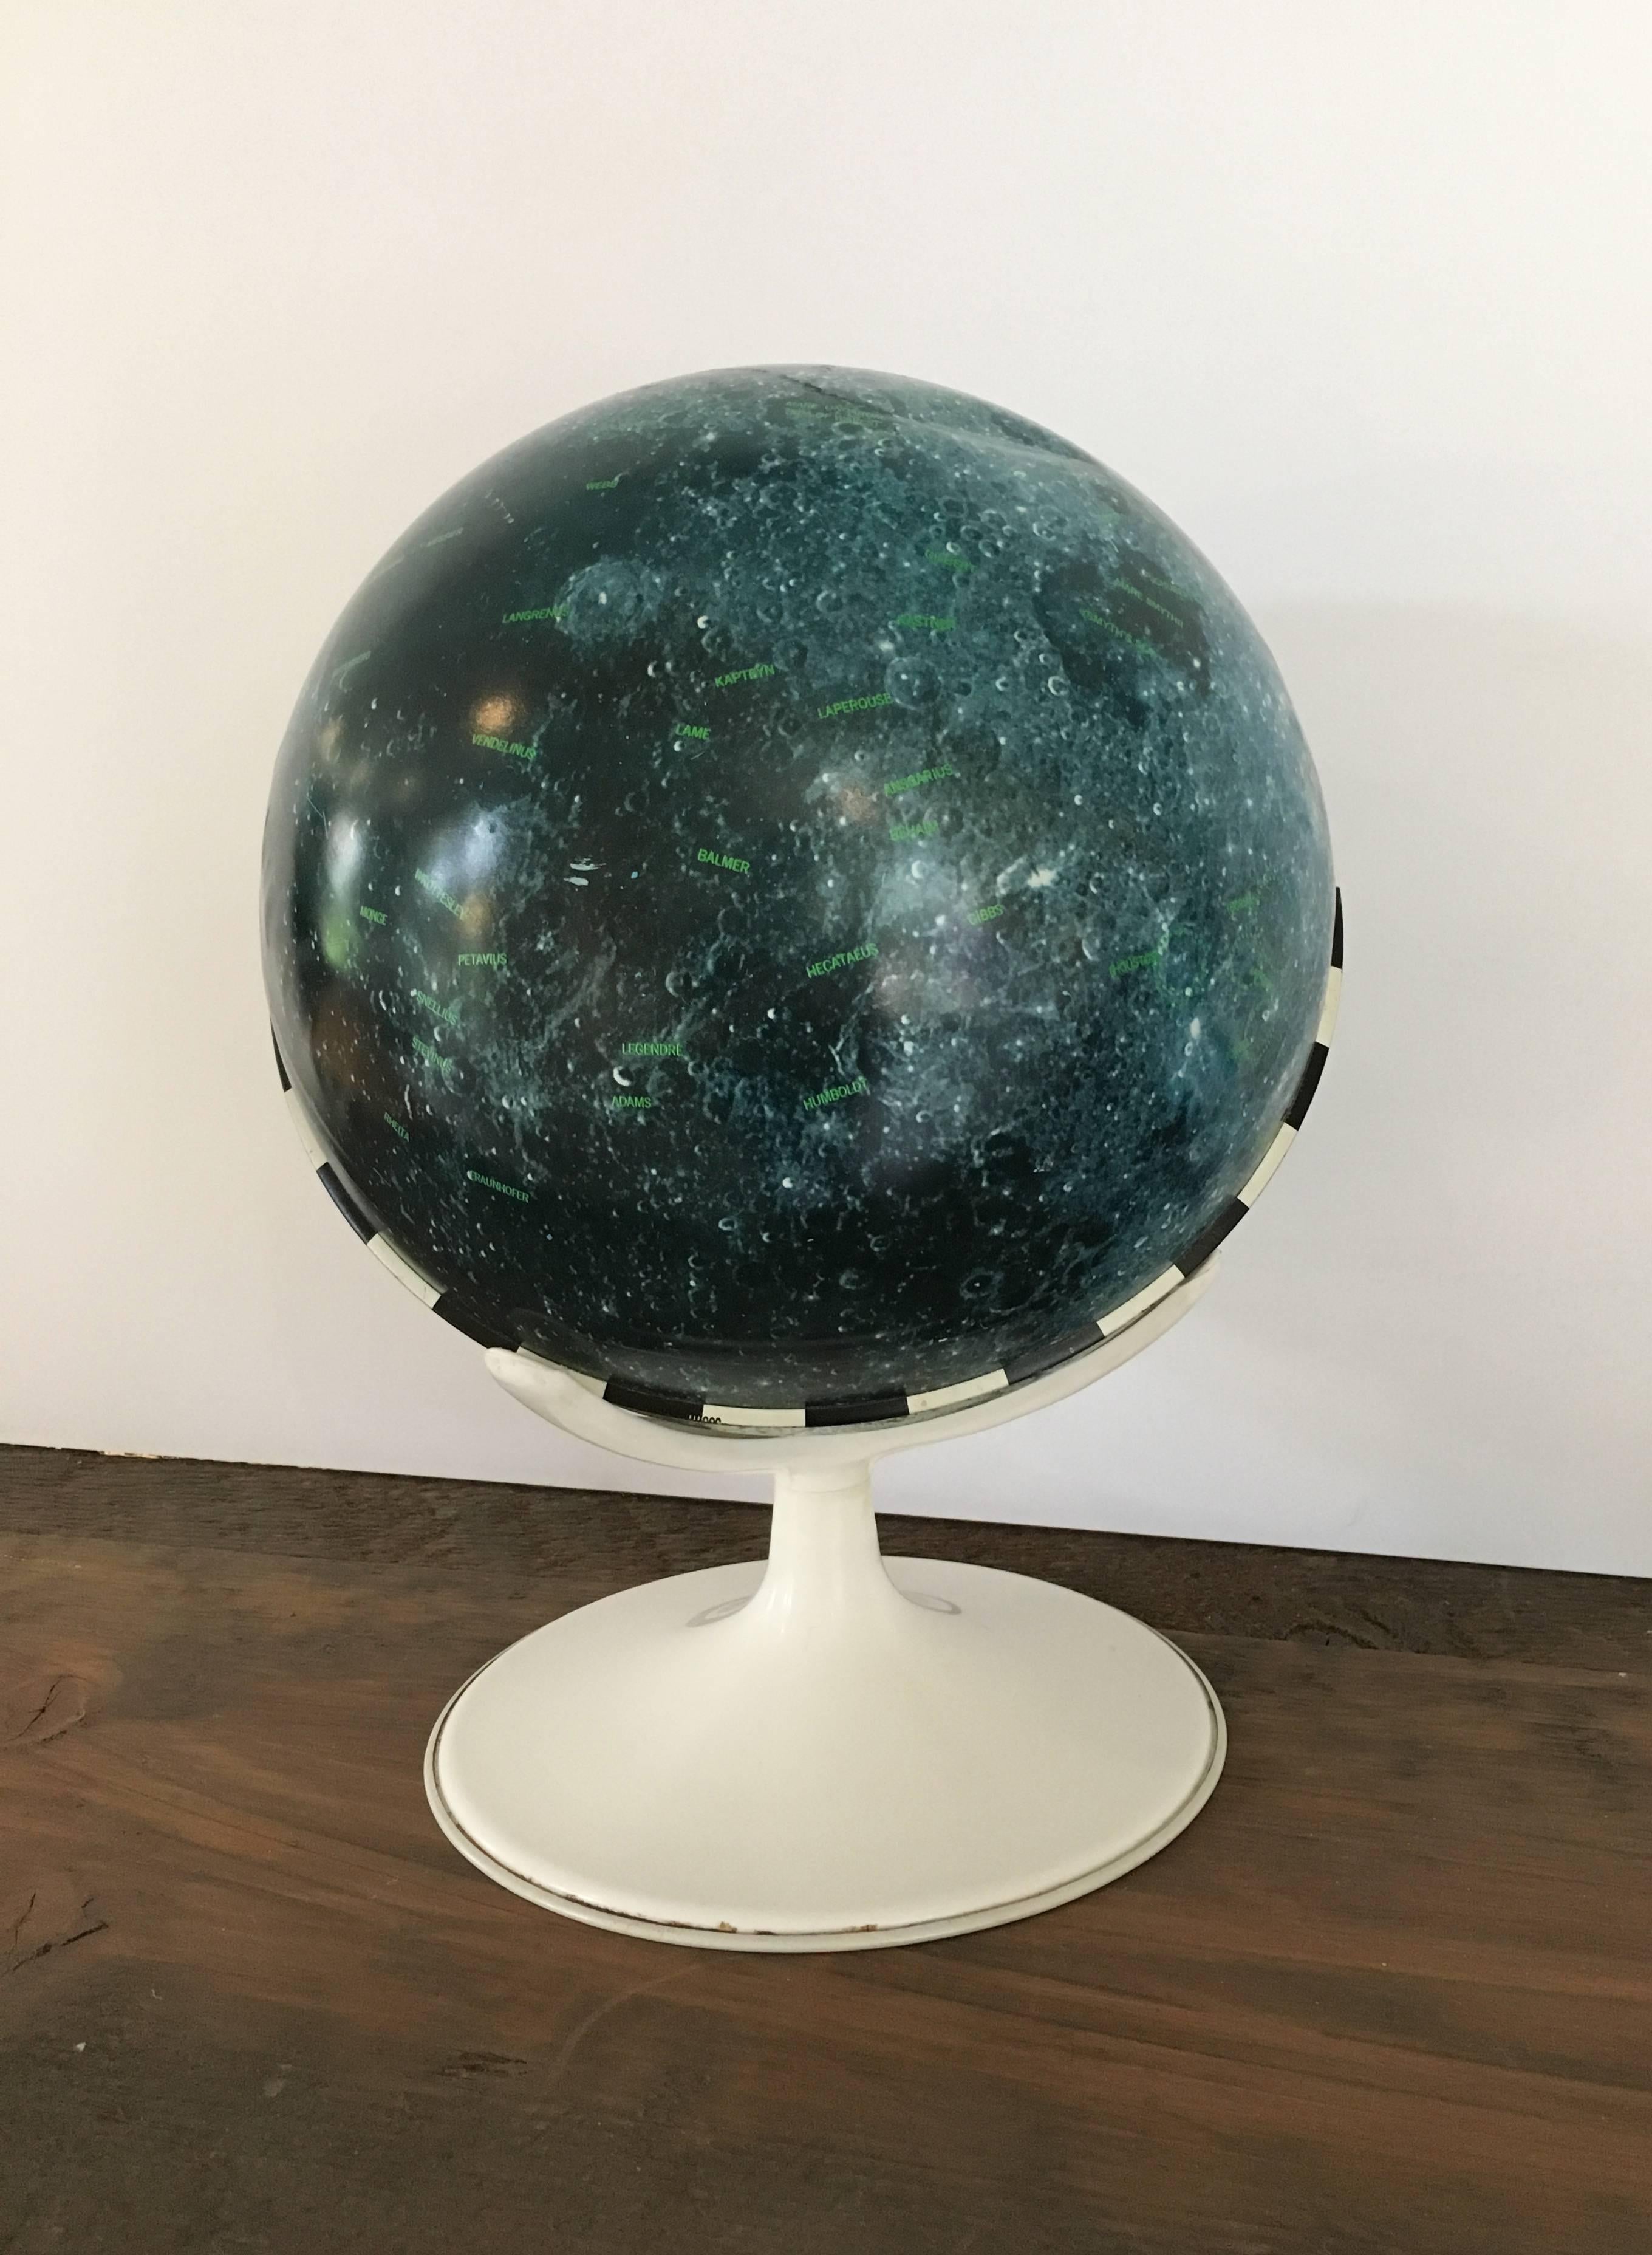 J. Chein & Company Lunar Globe, 1969. Dates prior to Apollo 11's first manned-moon landing. Maps the geography of the moon as well as attempts to explore the surface. 

Tin globe in great condition; one dent towards the top. Please see images or